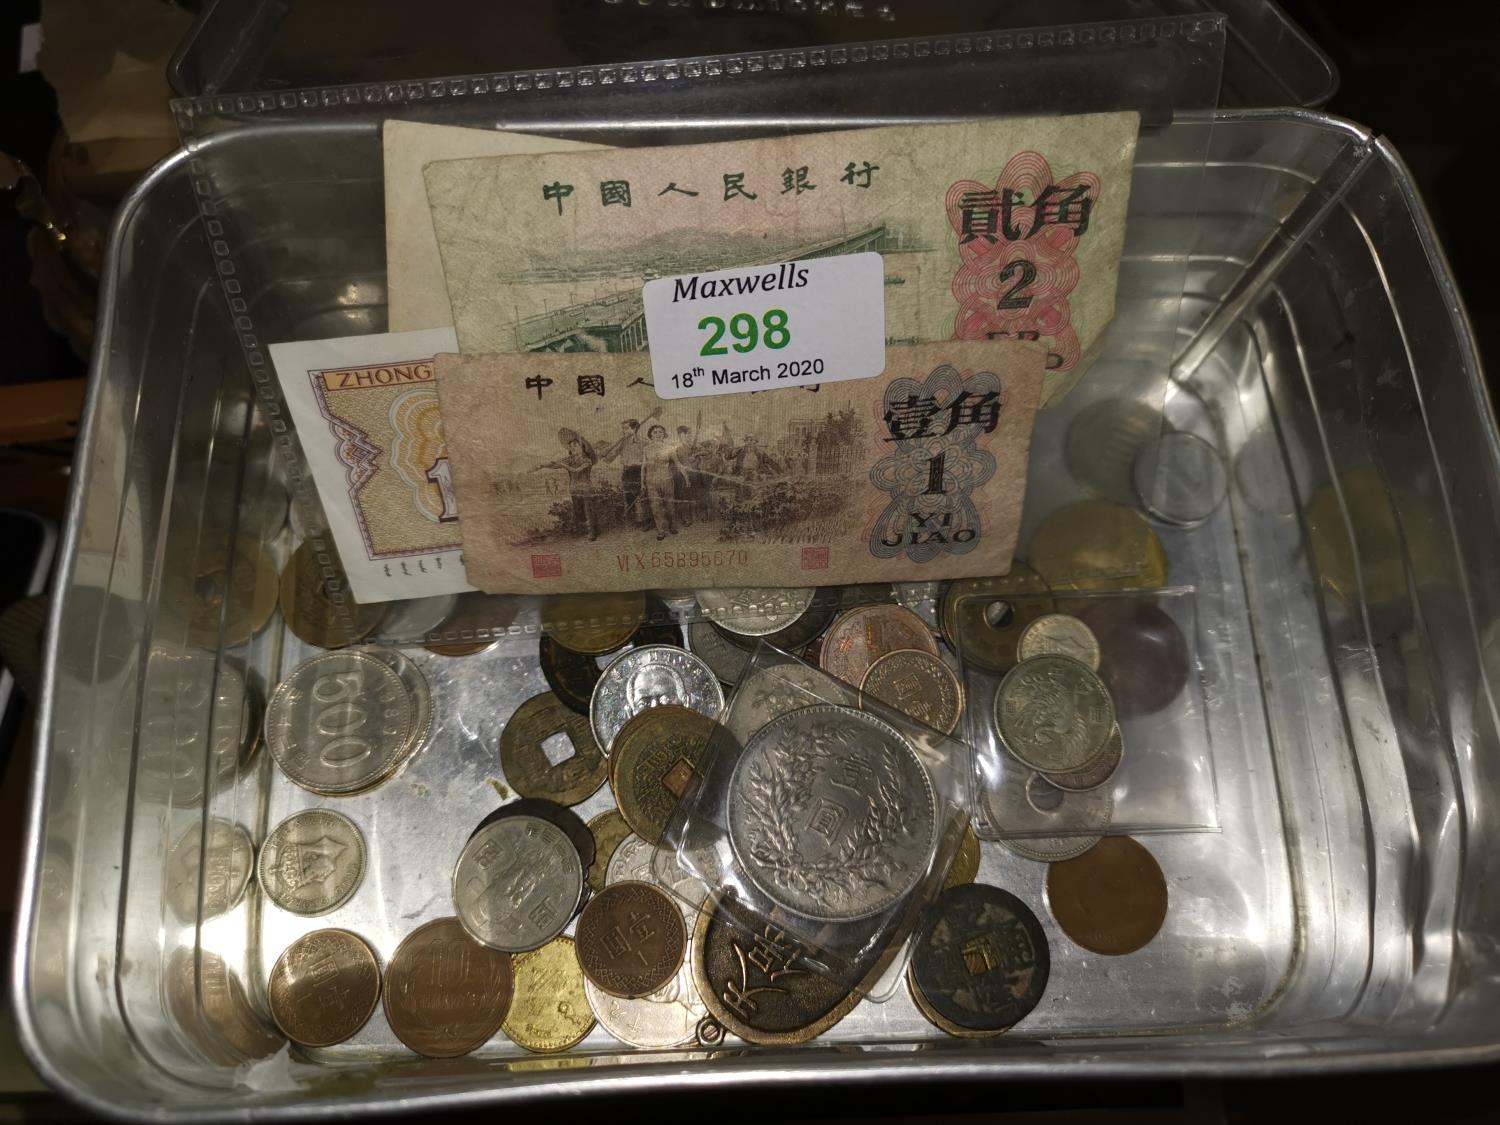 A selection of Chinese banknotes and coinage facsimile and others